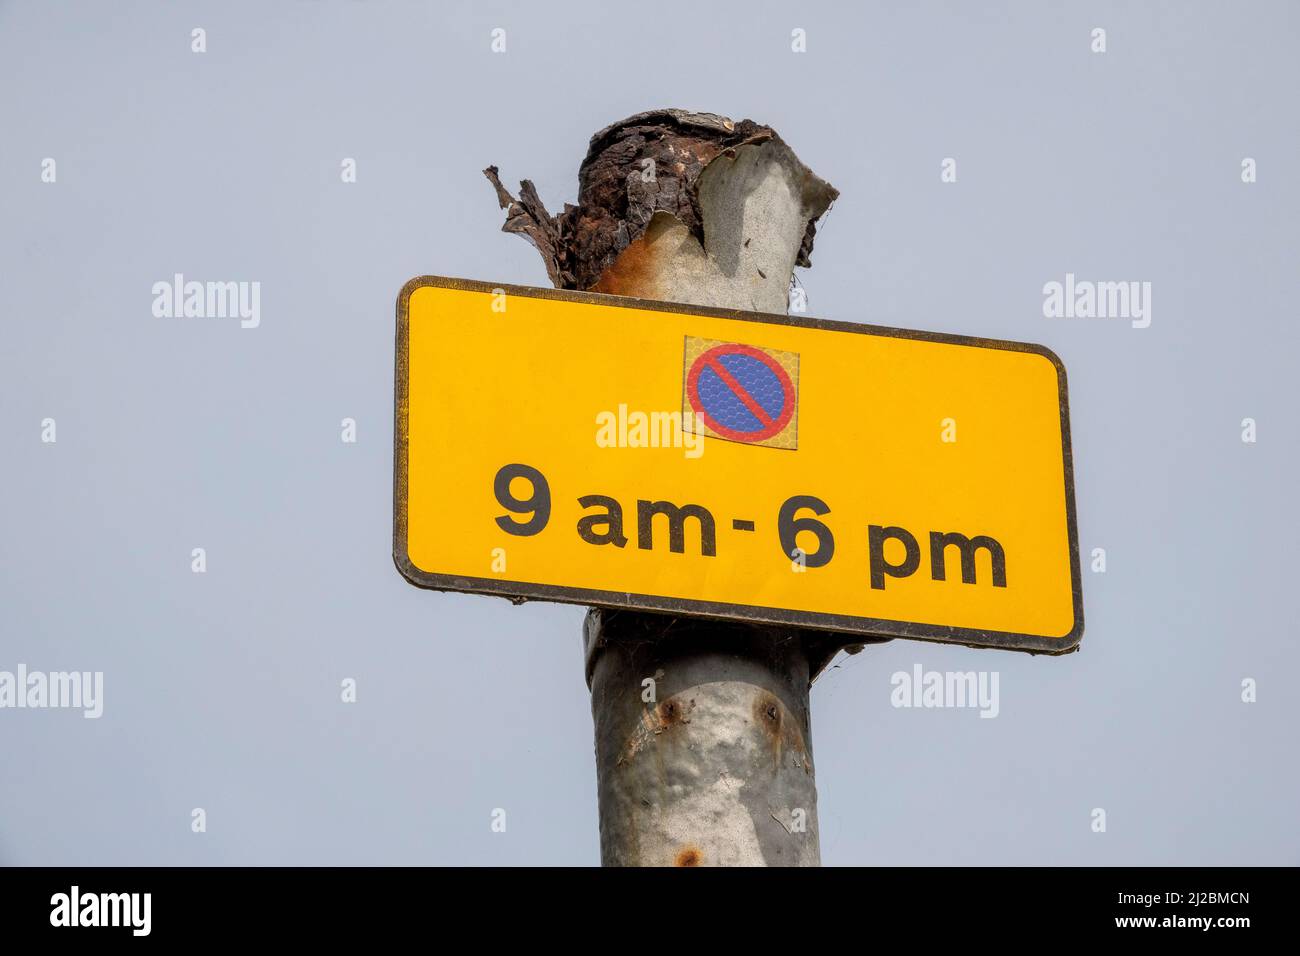 Small rectangular parking restriction sign black on yellow with red and blue symbol for the hours of 9am to 6pm mounted on a very corroded metal pole Stock Photo